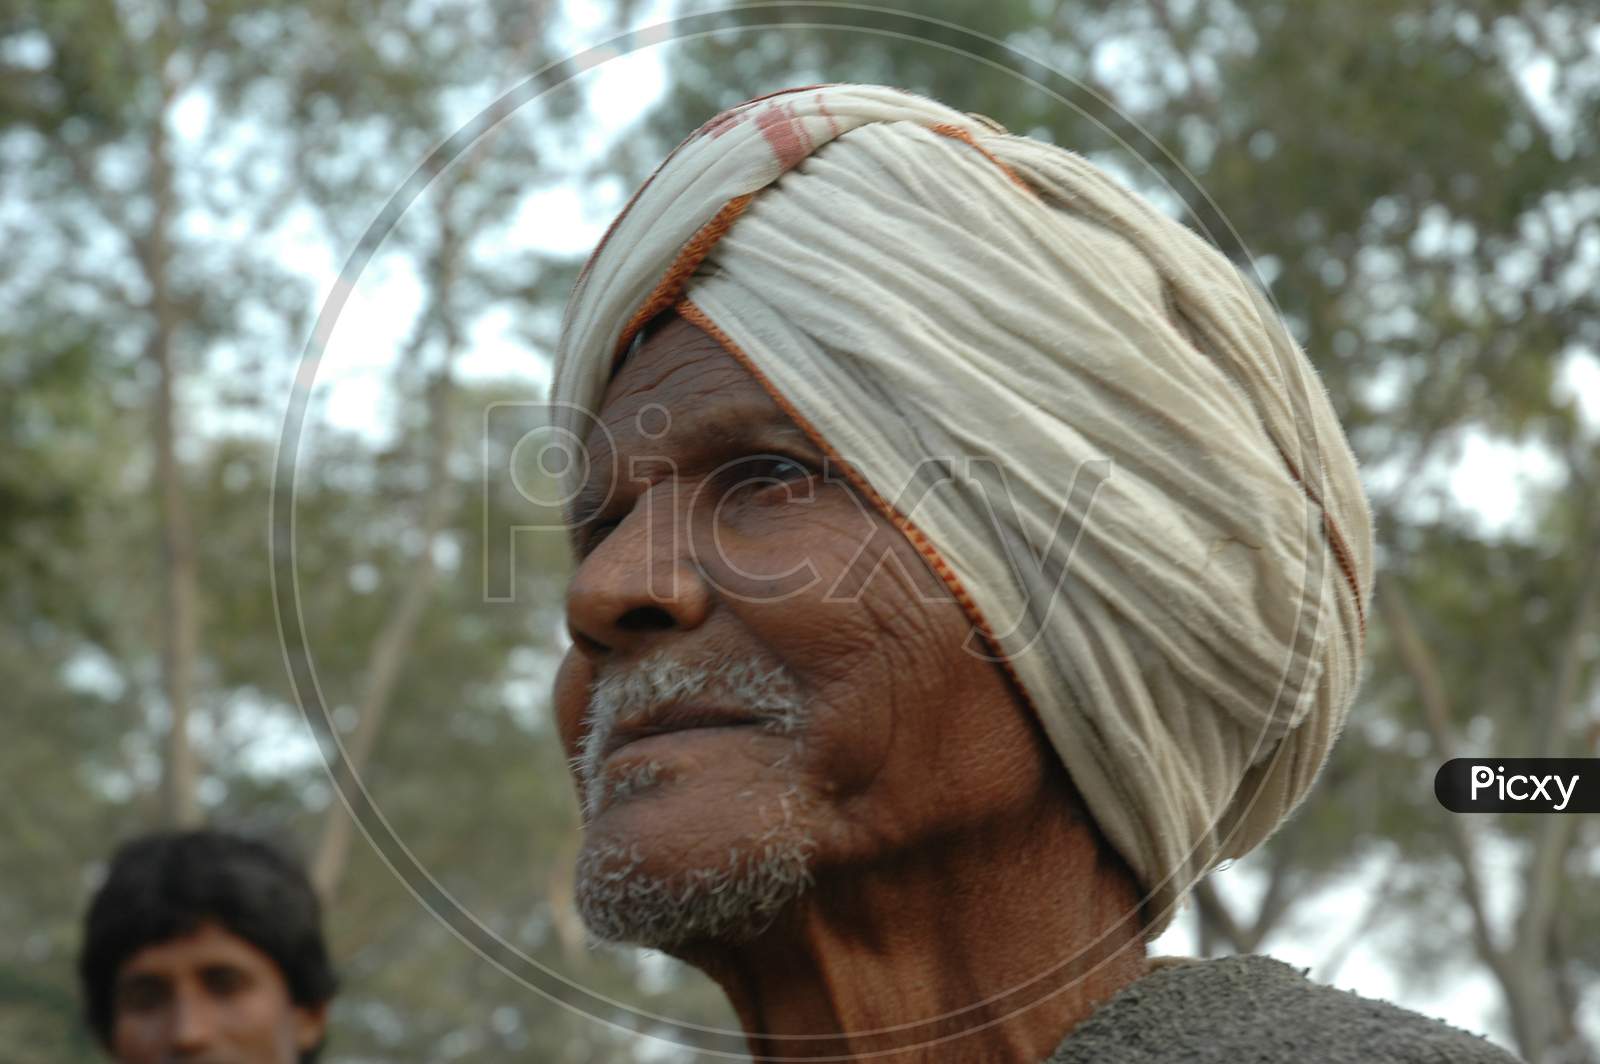 An Old Man With Turban